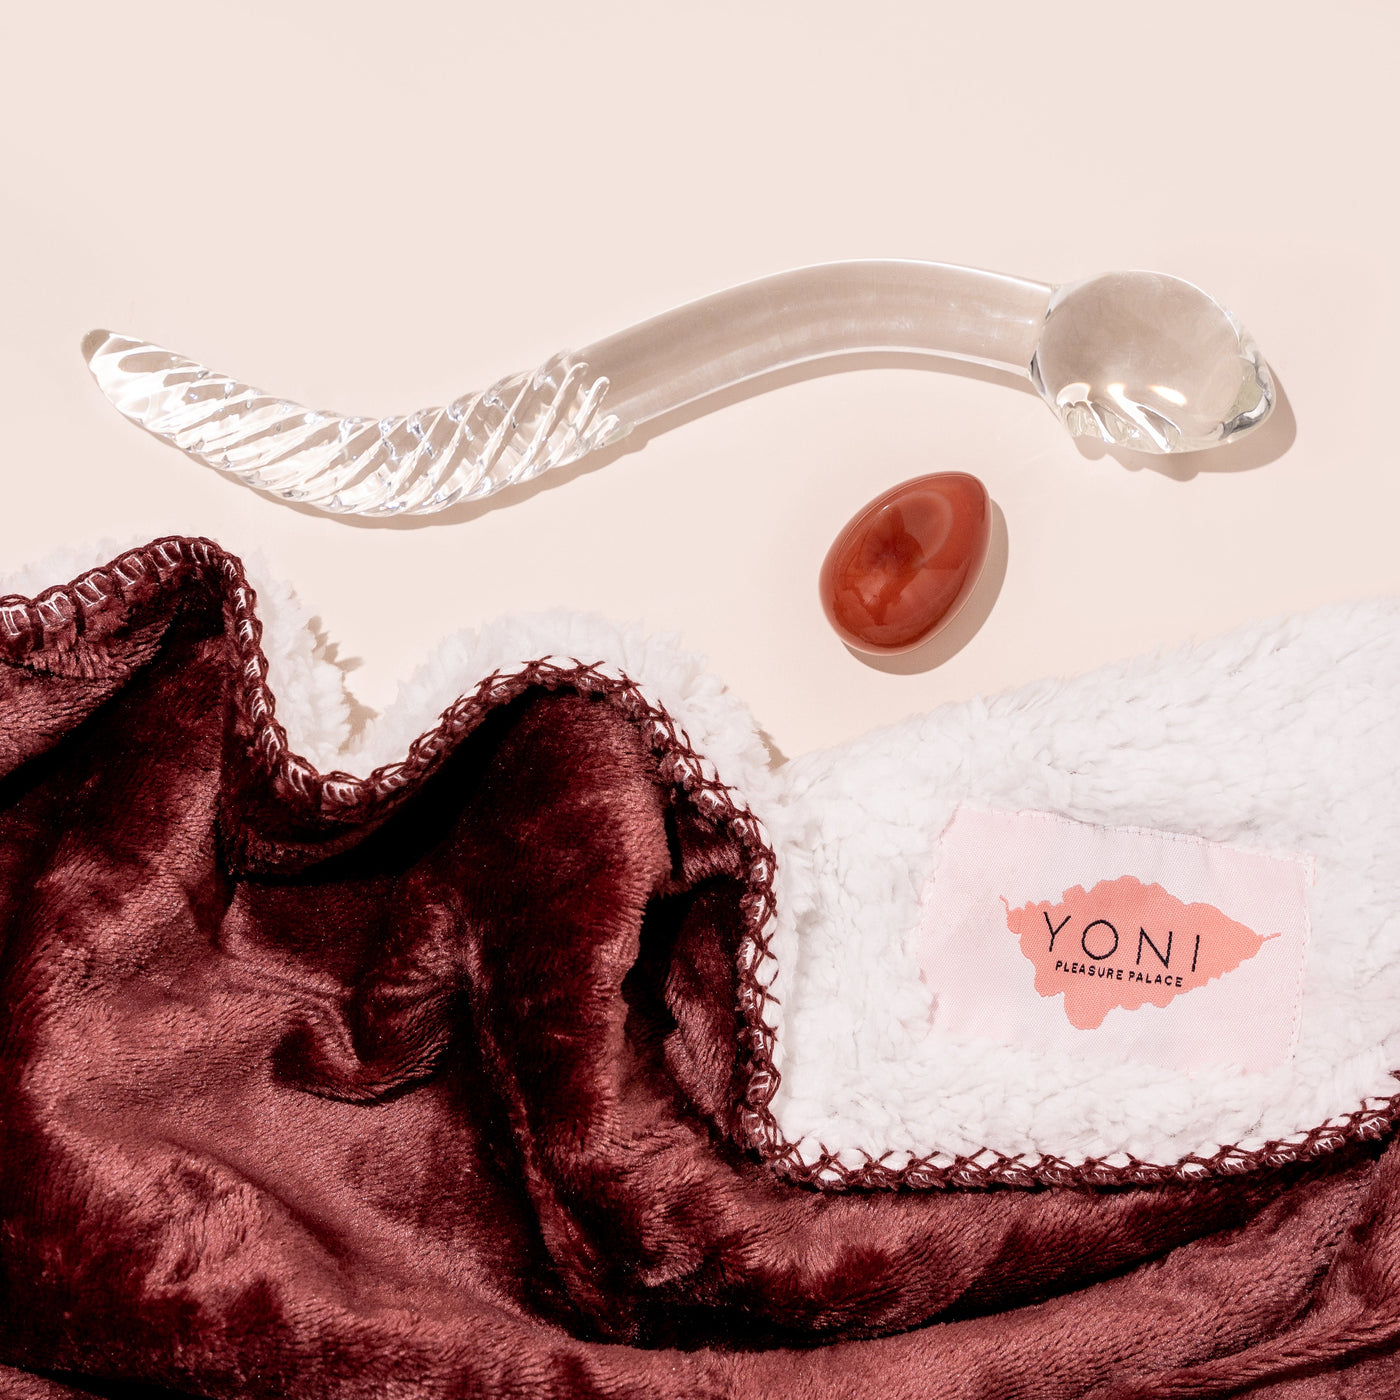 Cervix Moon kit includes waterproof blanket in moon blood red, red carnelian crystal yoni egg and clear glass cervix serpent pleasure wand. 